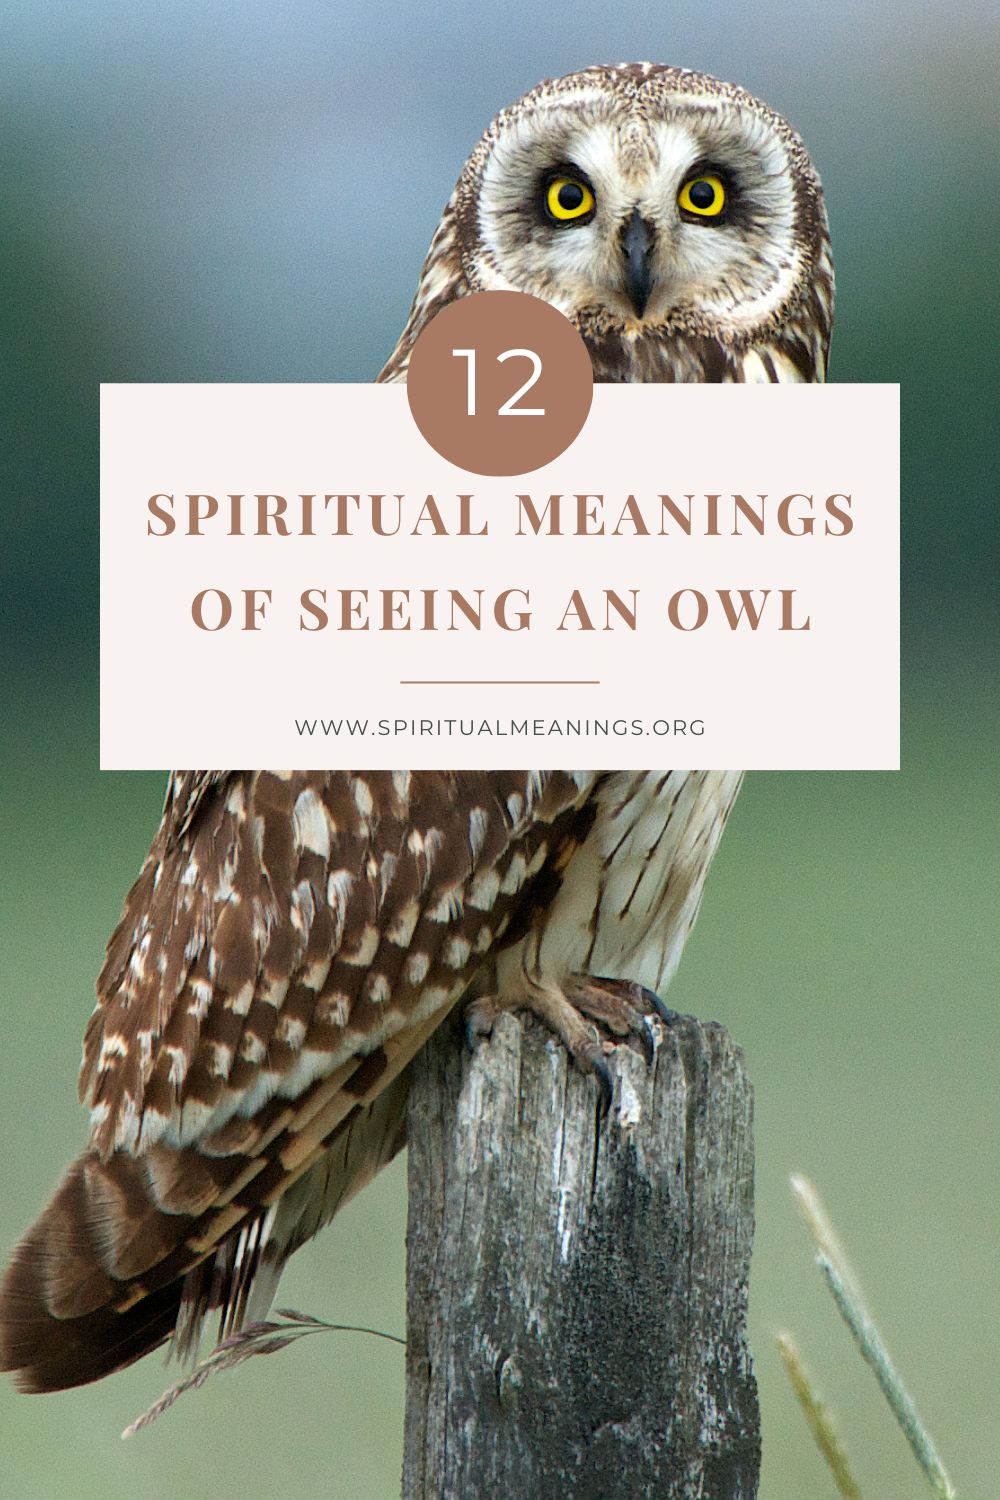 Owl Spiritual Meanings in many cultures